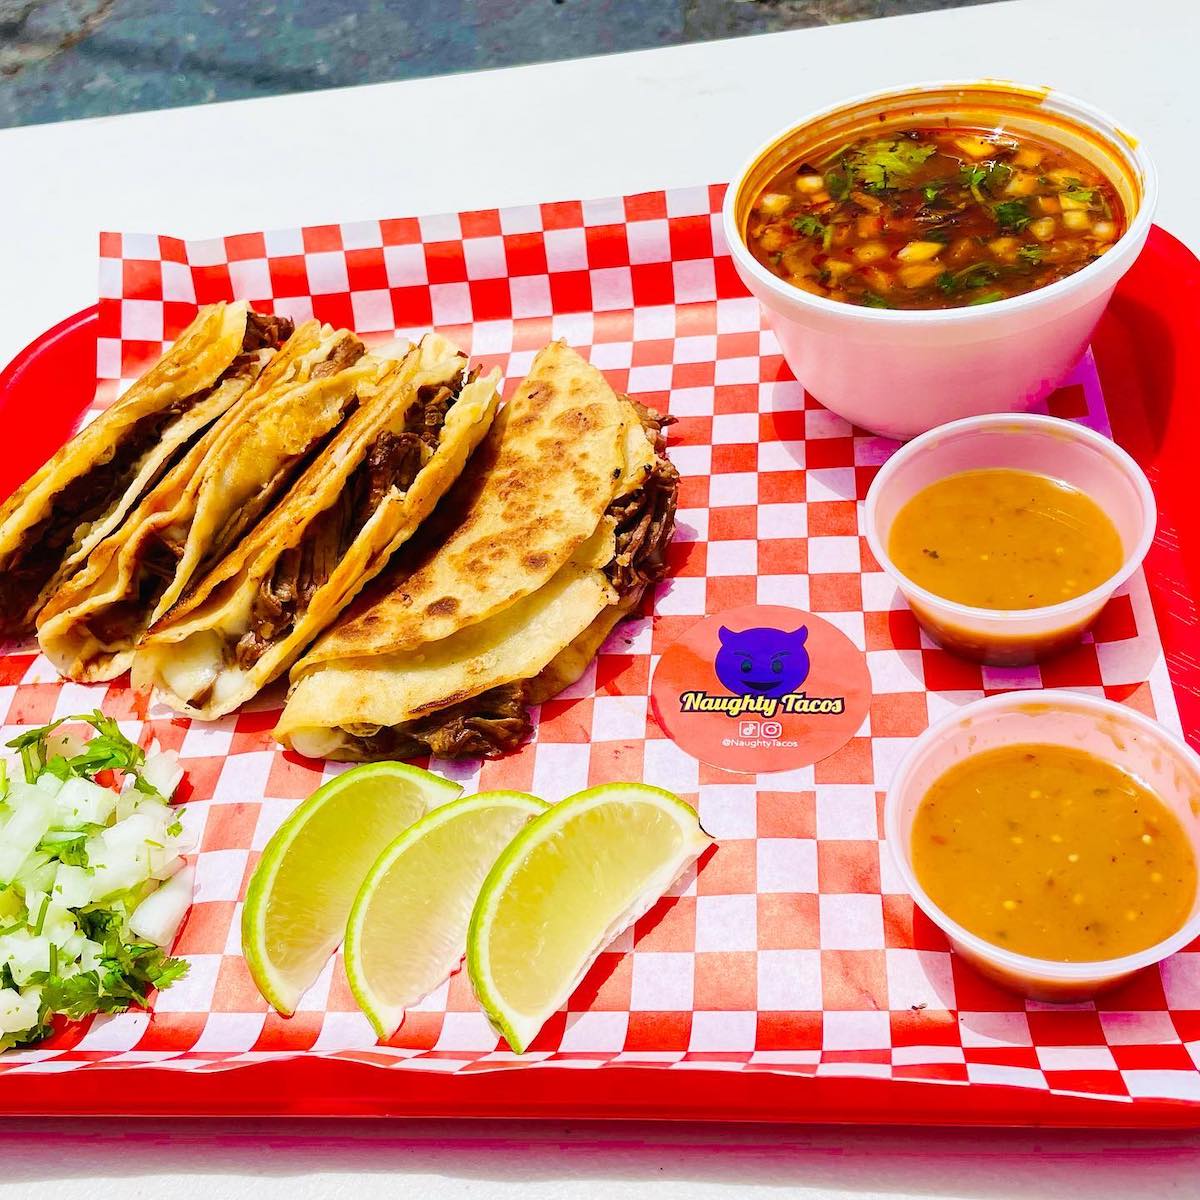 Naughty Tacos Brick-and-Mortar to Open by Summer